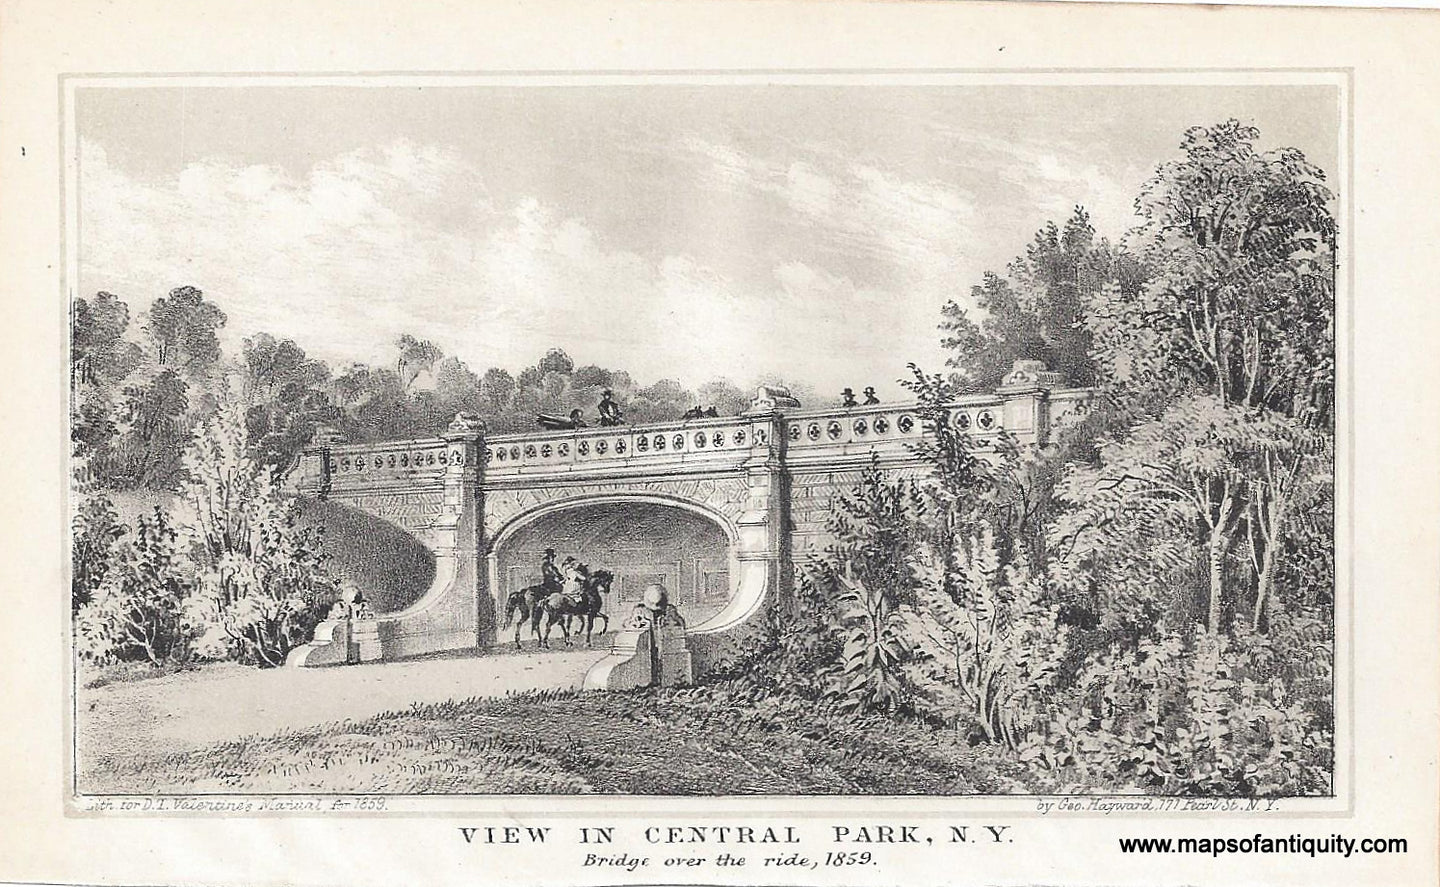 Antique Print View in Central Park, New York City, specifically the Bridge over the ride. Charming image shows riders on horseback going under the bridge while a carriage and pedestrians cross above. 1859, Hayward, Valentine's Manual, Maps of Antiquity